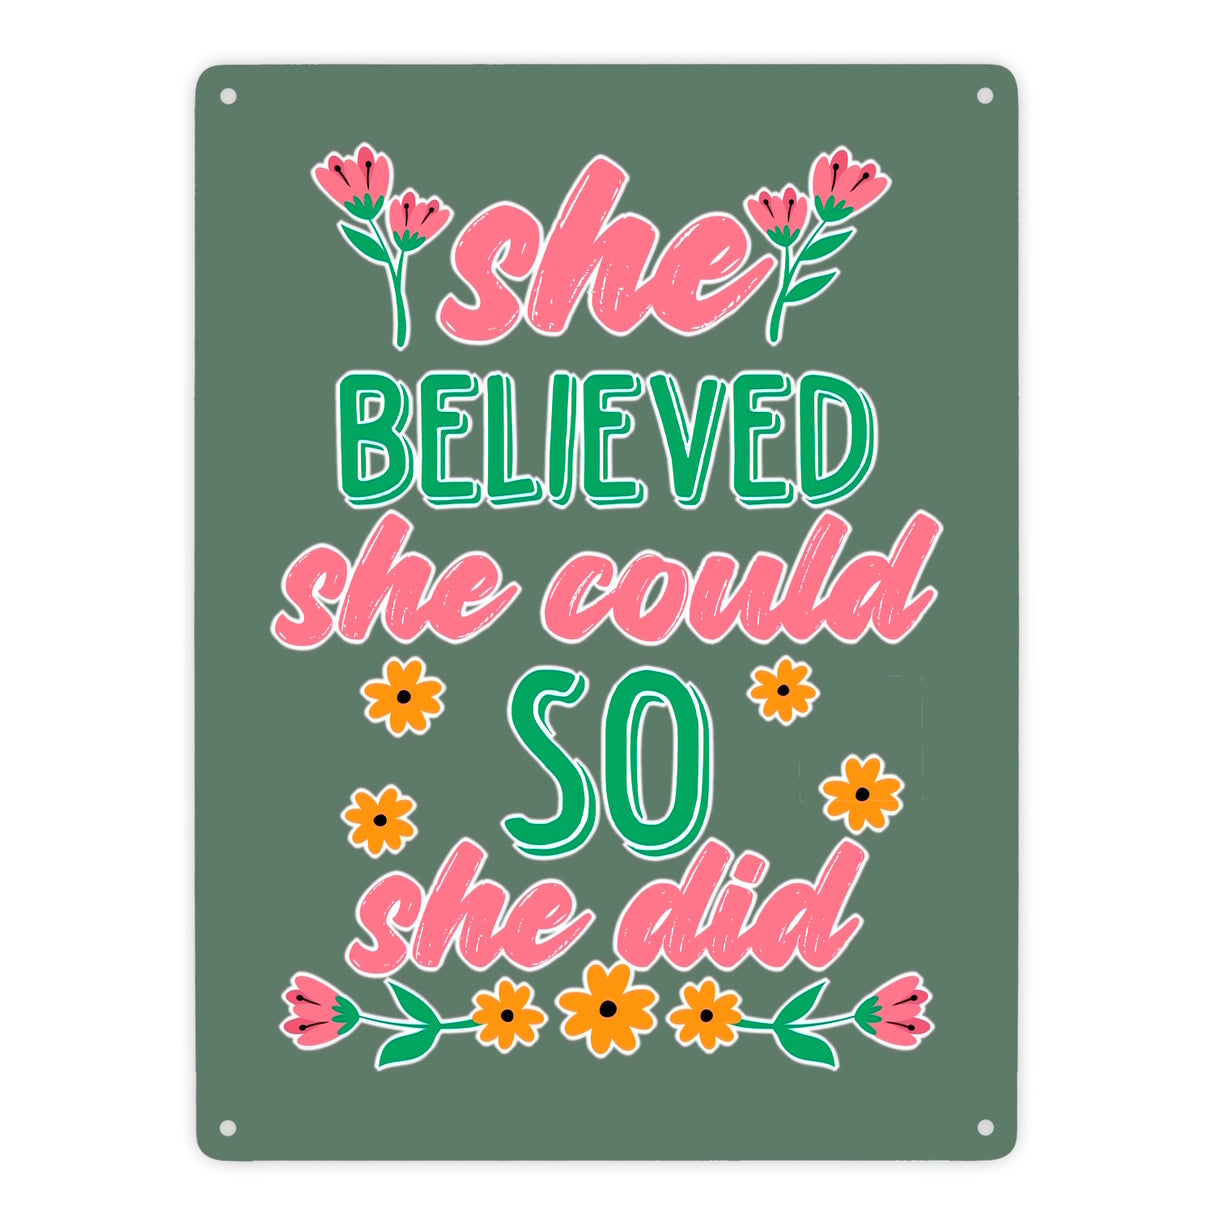 Motivation Metallschild in 15x20 cm mit Spruch She believed she could so she did